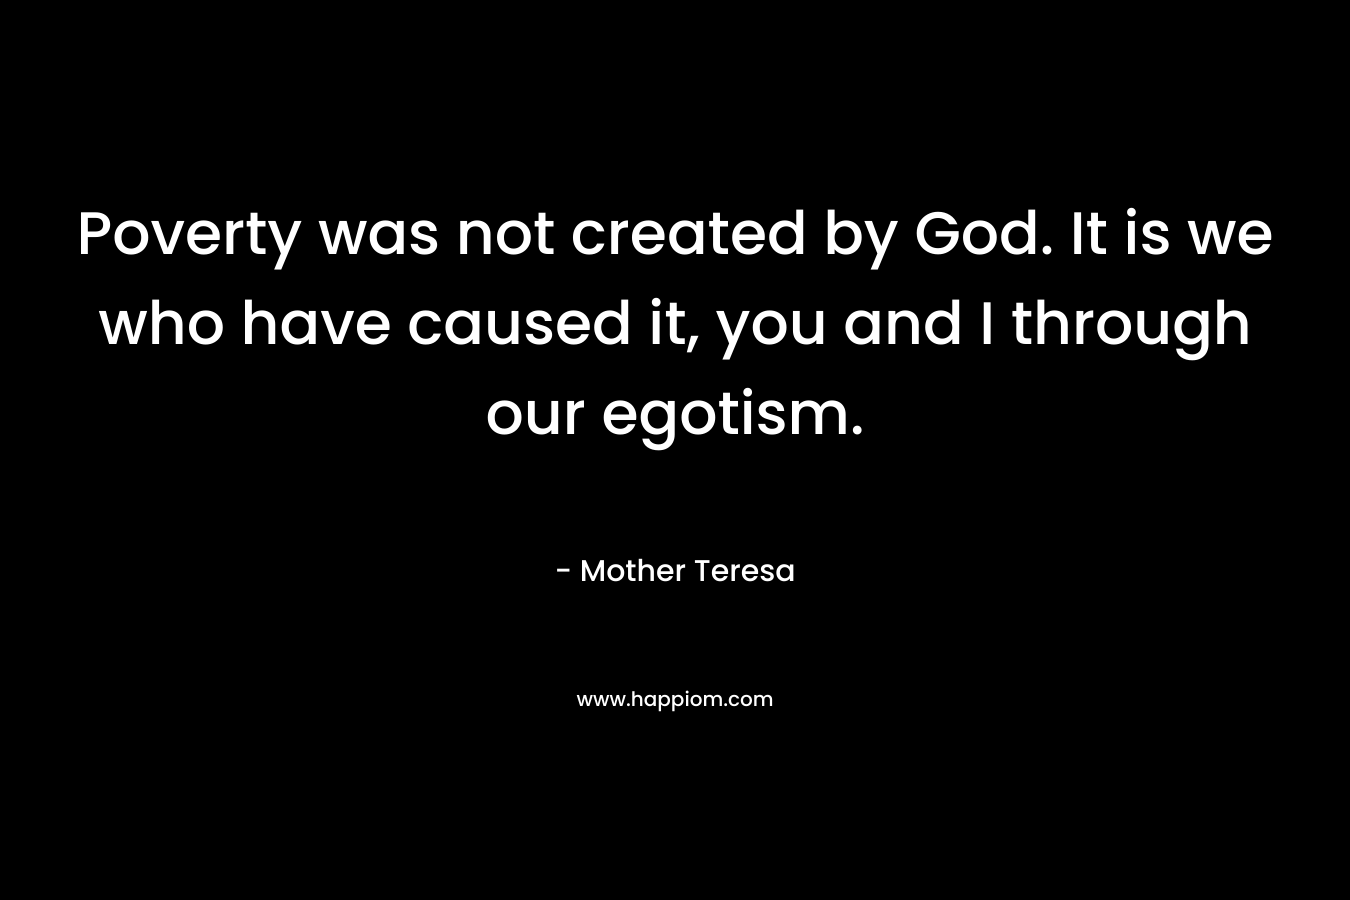 Poverty was not created by God. It is we who have caused it, you and I through our egotism. – Mother Teresa